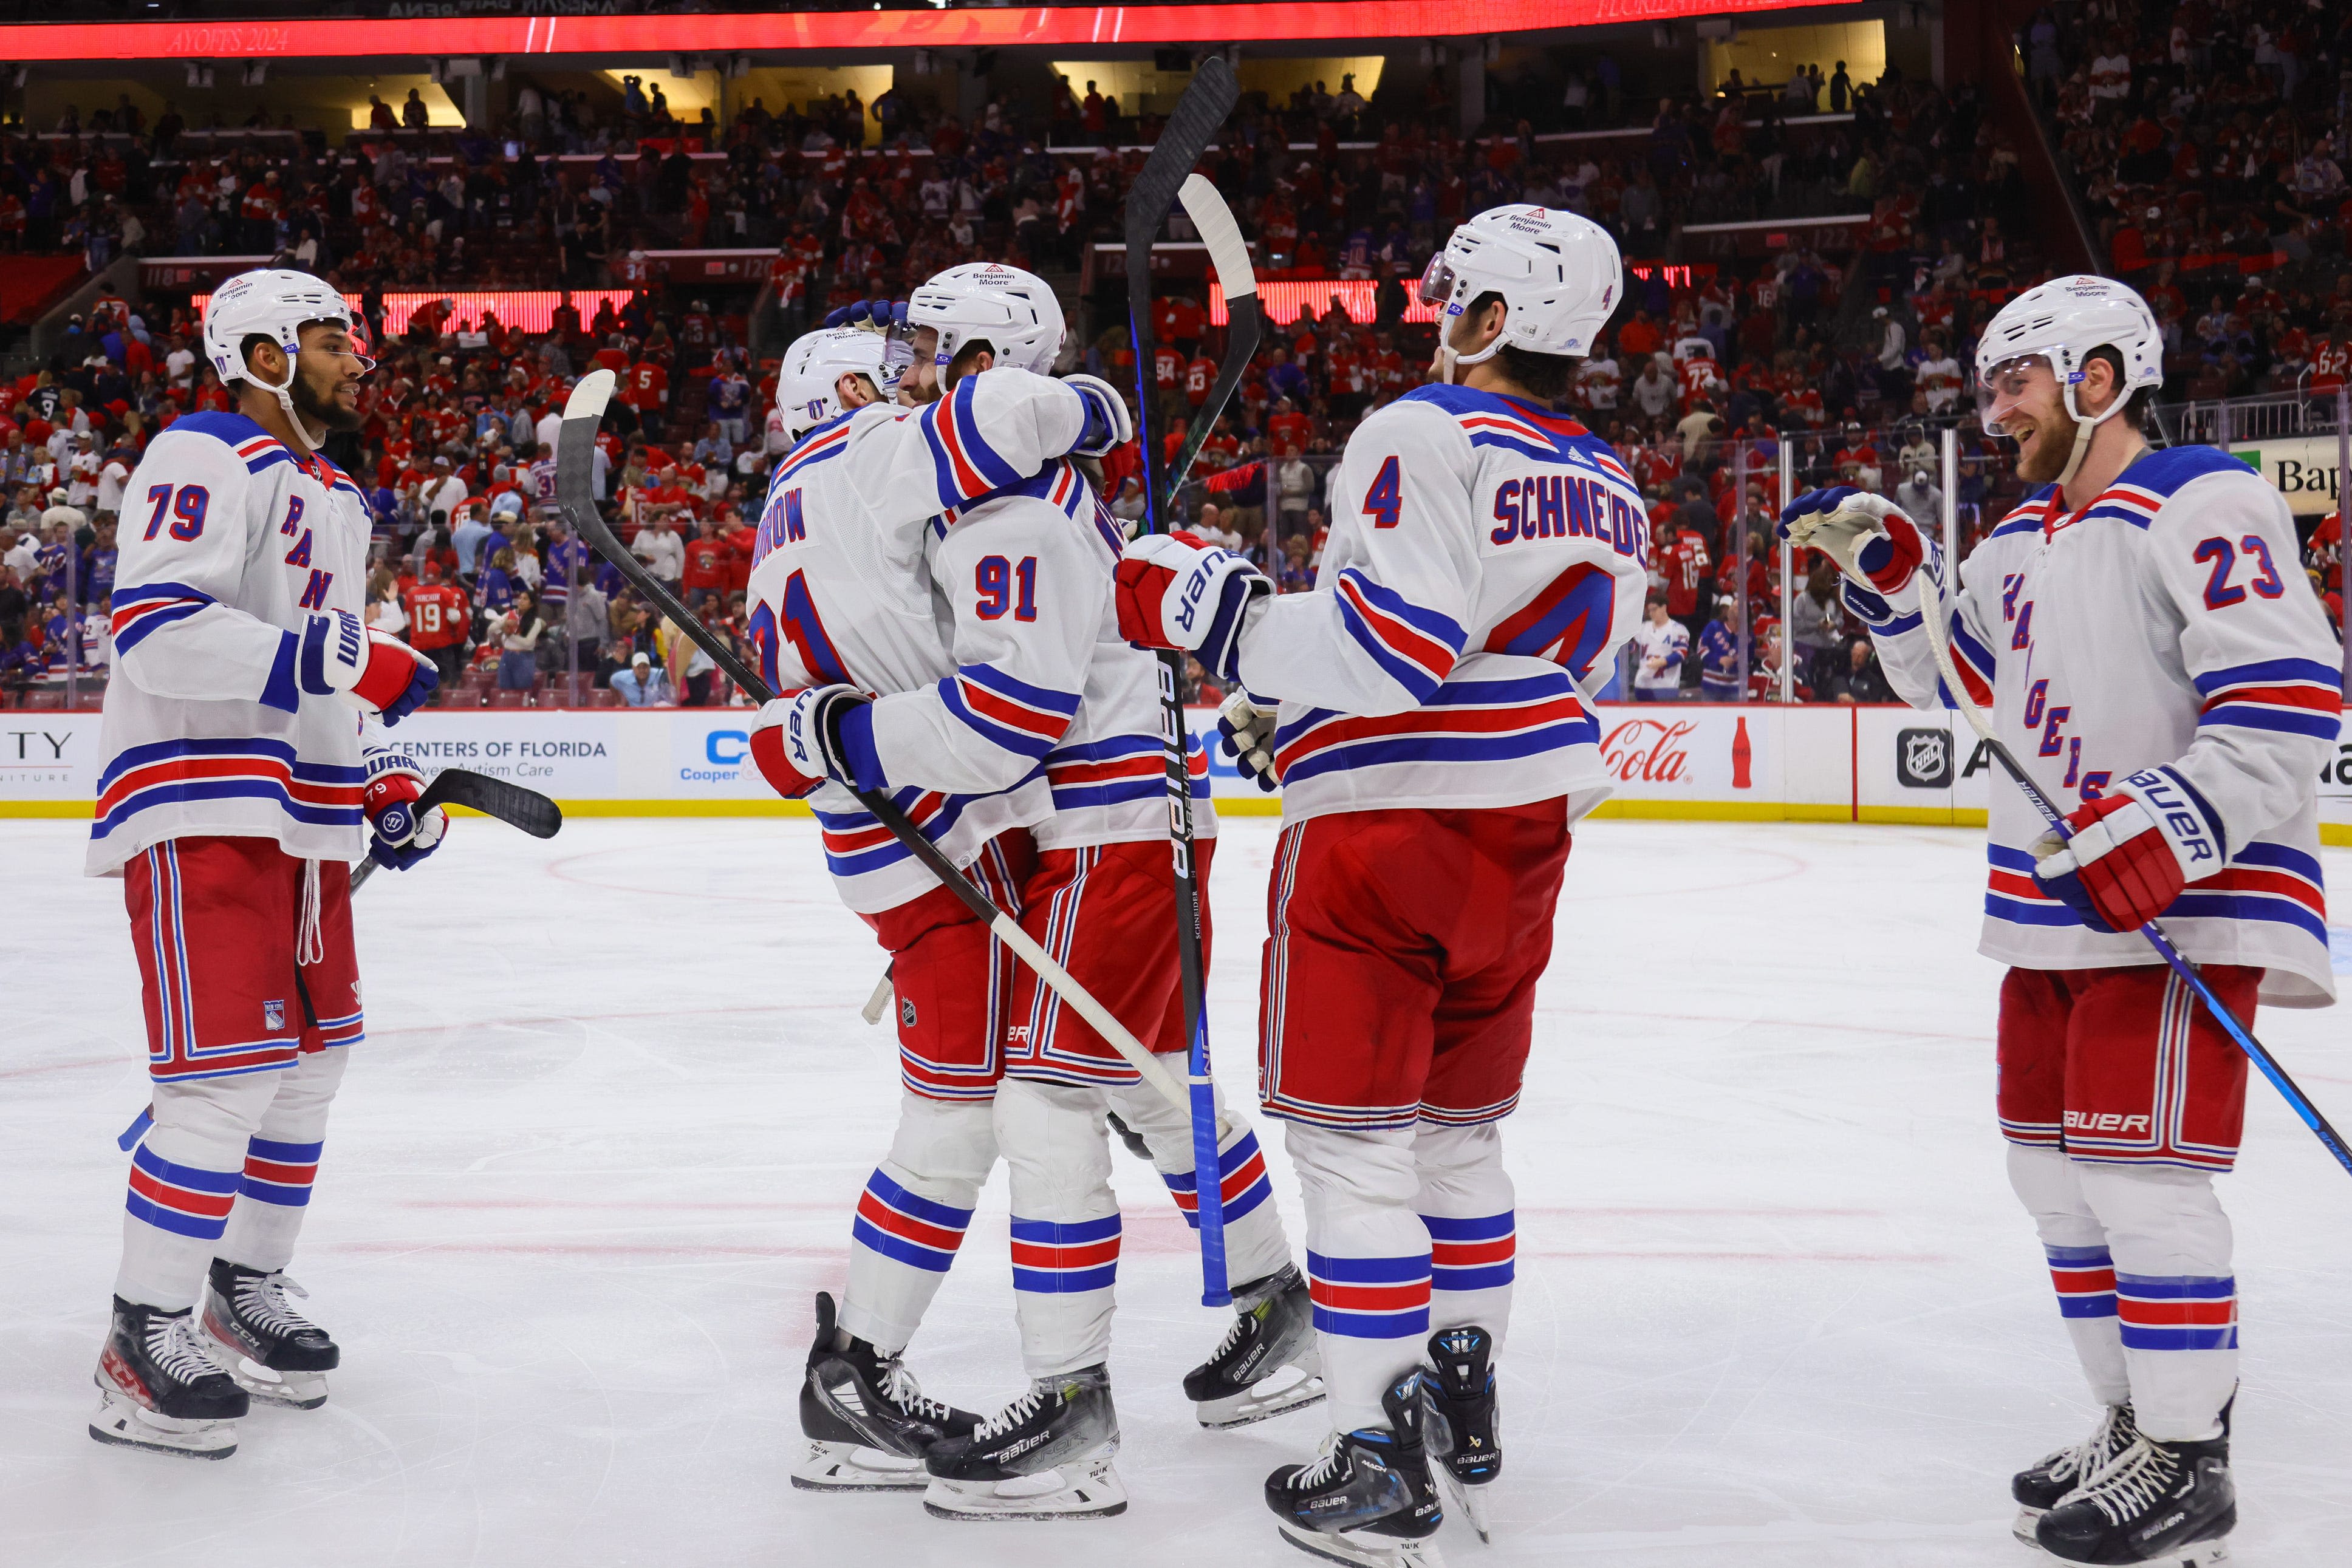 Game 3 takeaways: Alex Wennberg's OT winner gives Rangers 2-1 series lead over Panthers